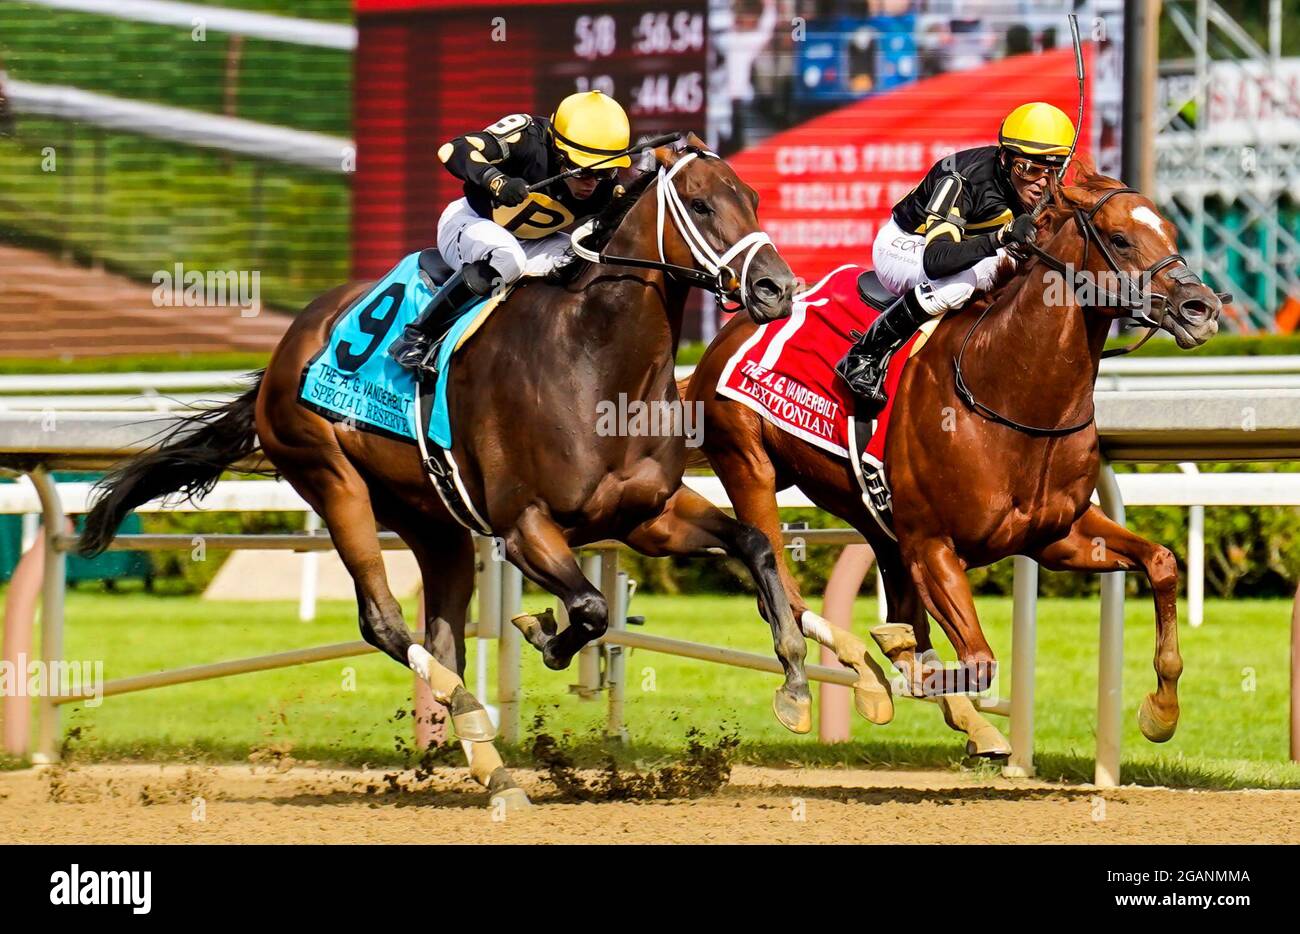 Saratoga Springs, NY, USA. 31st July, 2021. July 31, 2021: Lexitonian #1, ridden by jockey Jose Lezcano battles back against #9 Special Reserve and jockey Joel Rosario to win the Grade 1 Alfred G. Vanderbilt Handicap at Saratoga Race Course in Saratoga Springs, N.Y. on July 31, 2021. Dan HearyEclipse SportswireCSM/Alamy Live News Stock Photo